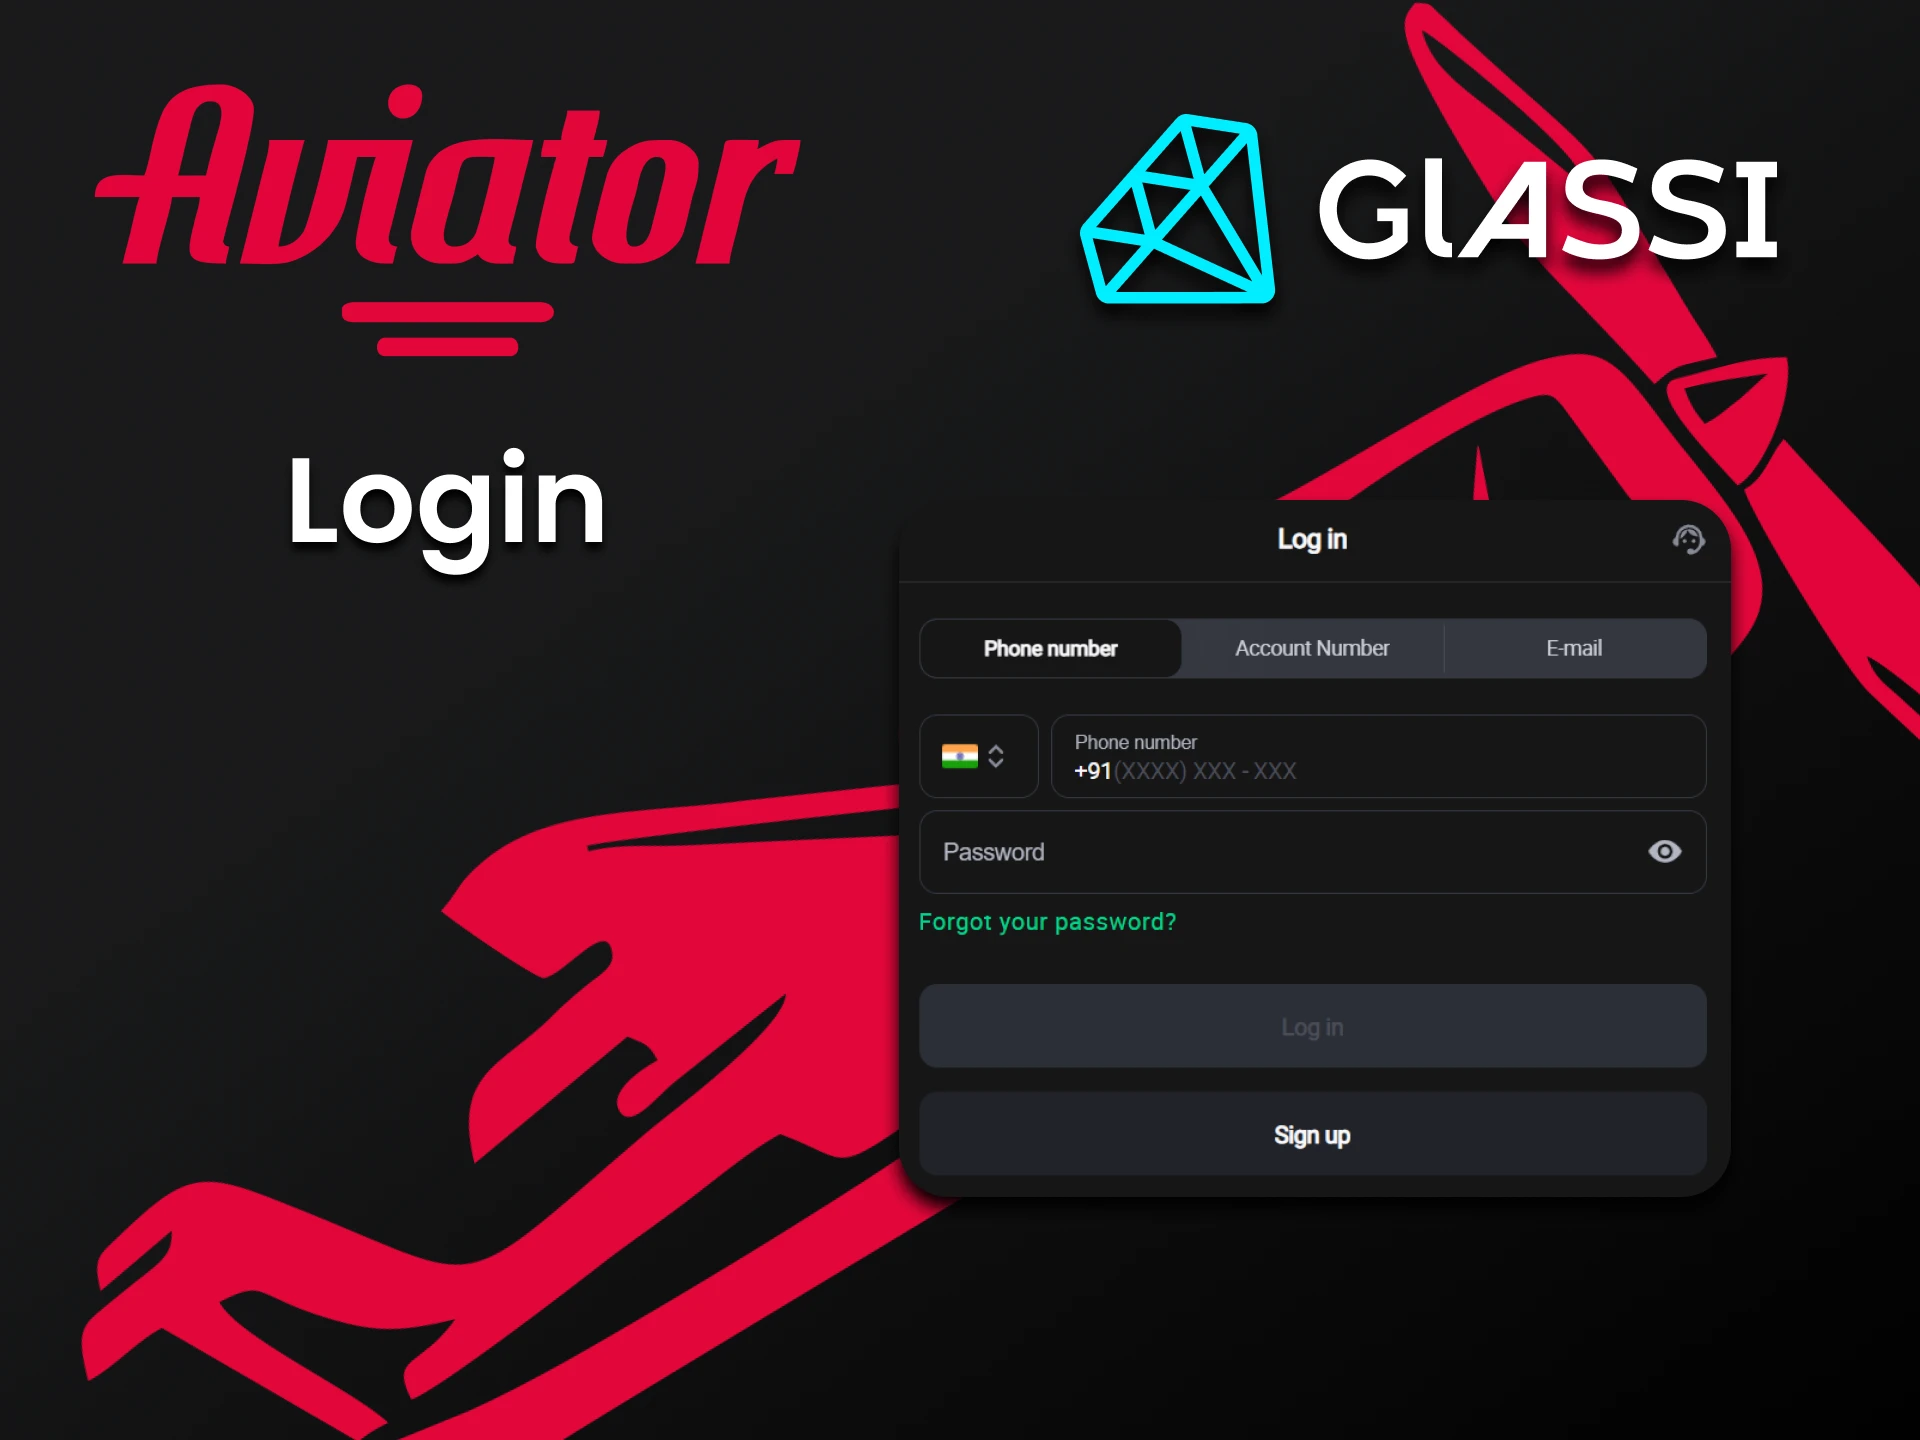 Use your Glassi Casino account to play Aviator.